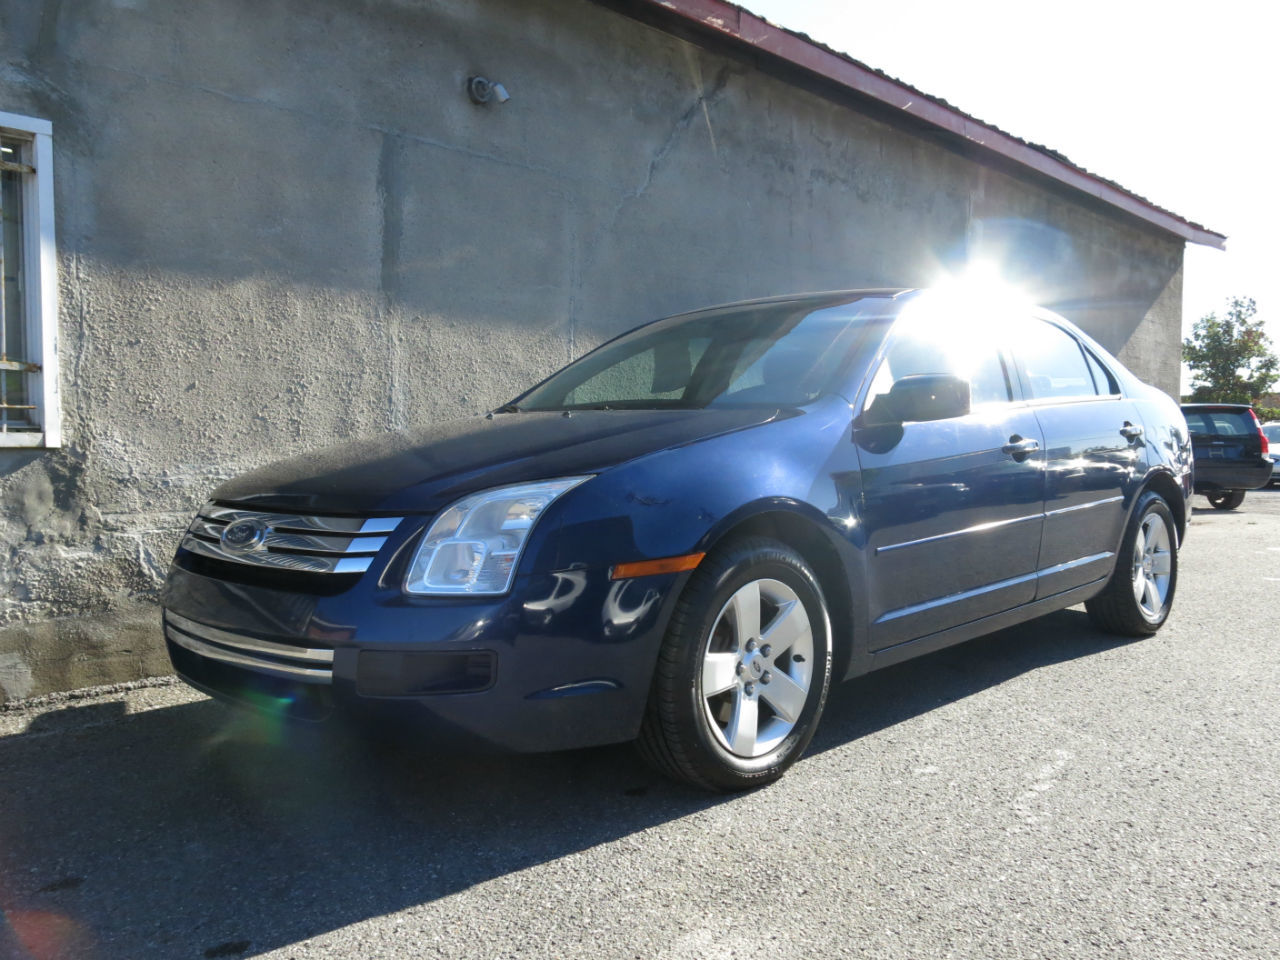 Used 2006 ford fusion engine #1